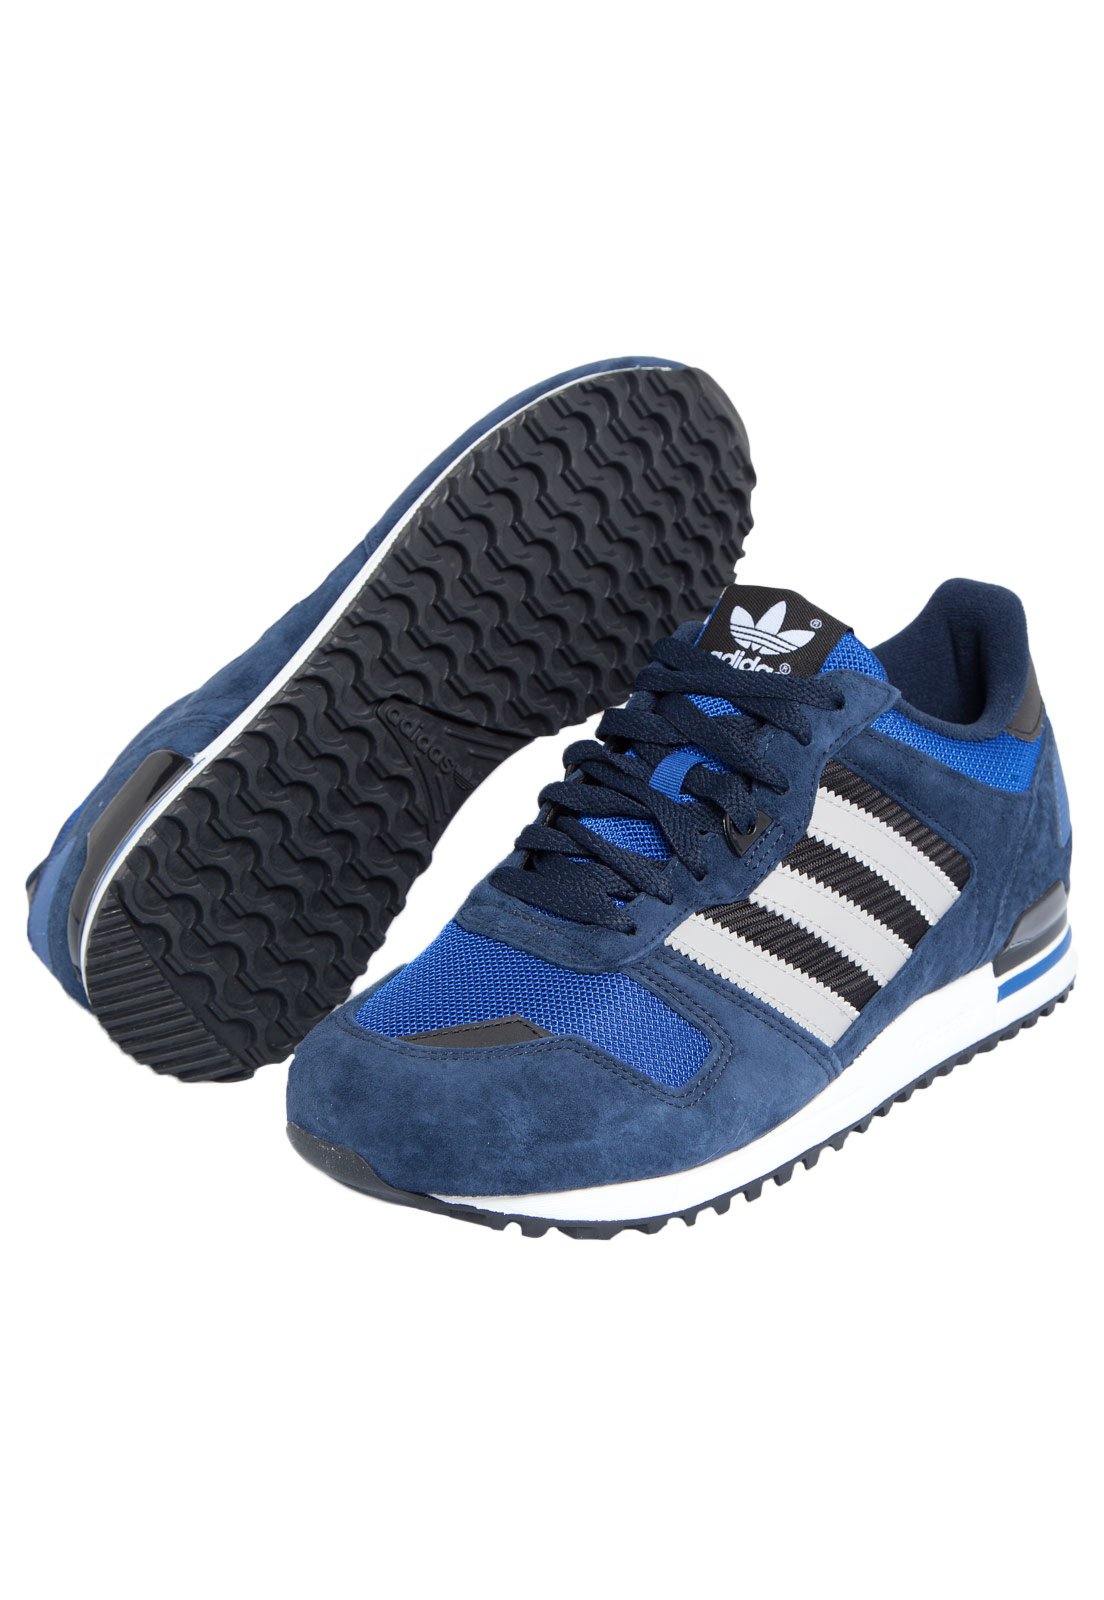 Tenis Adidas Zx Hotsell, SAVE 52%.